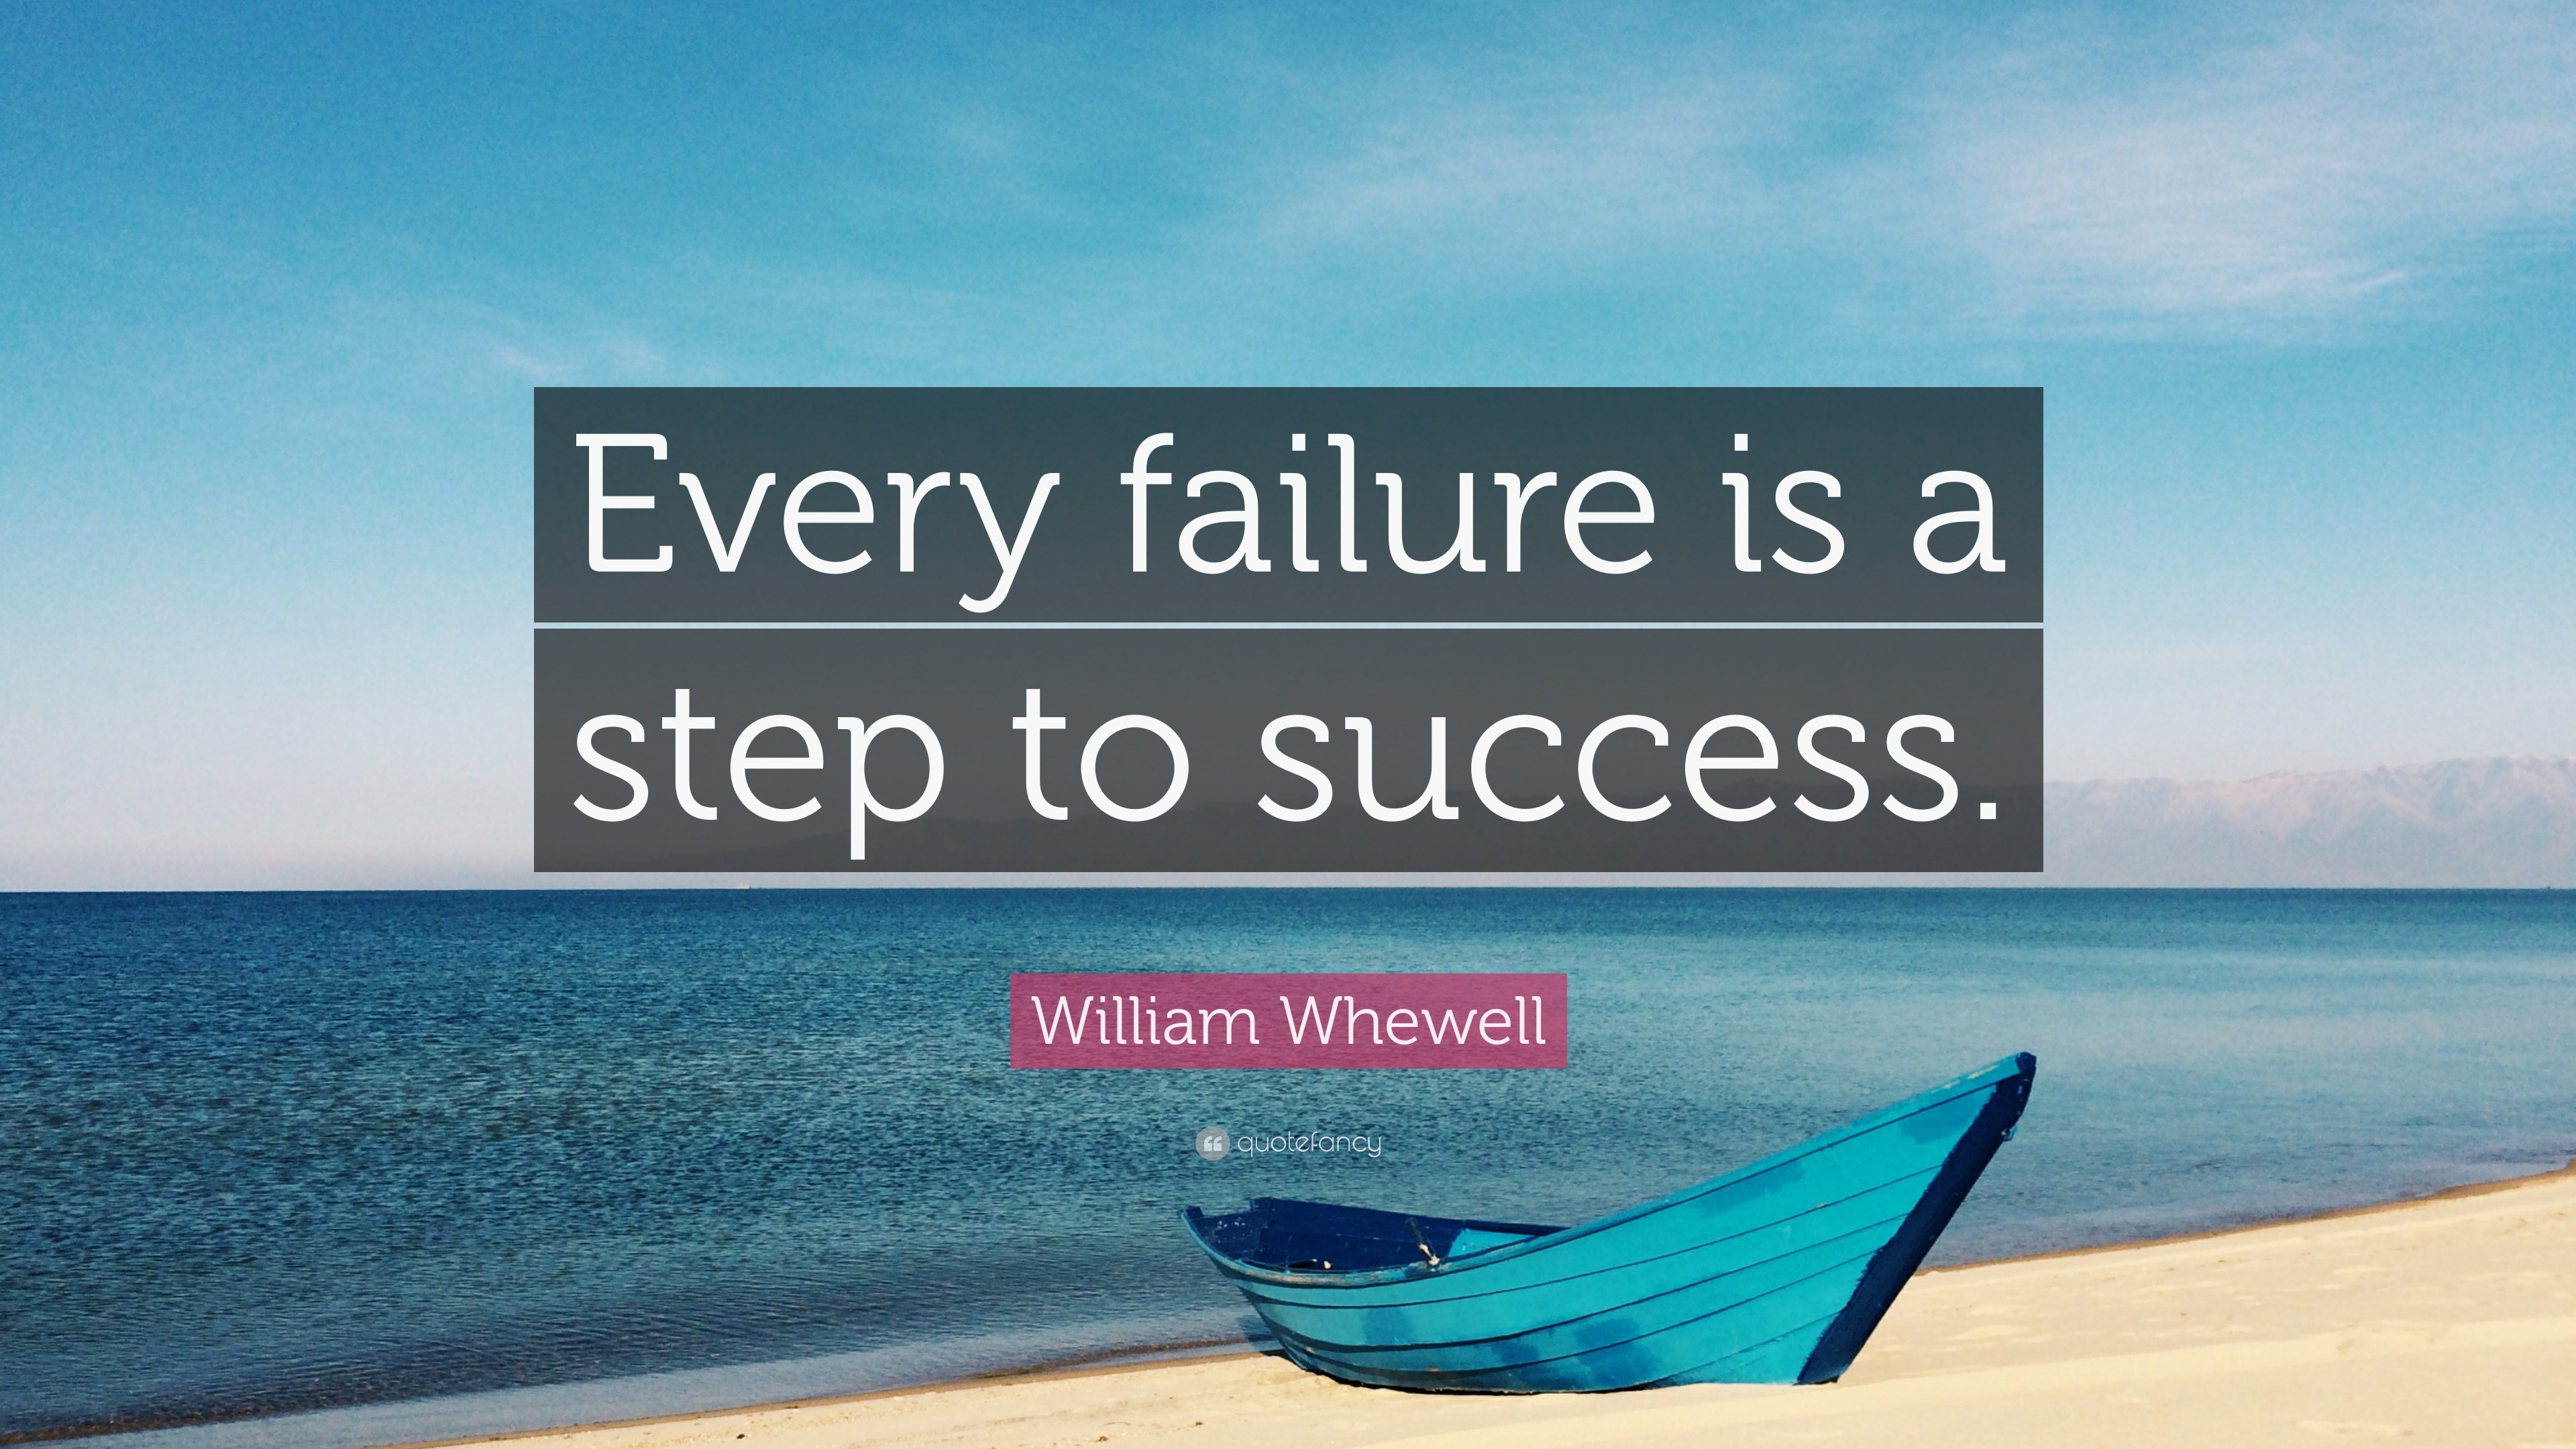 William Whewell Quote “Every failure is a step to success.”